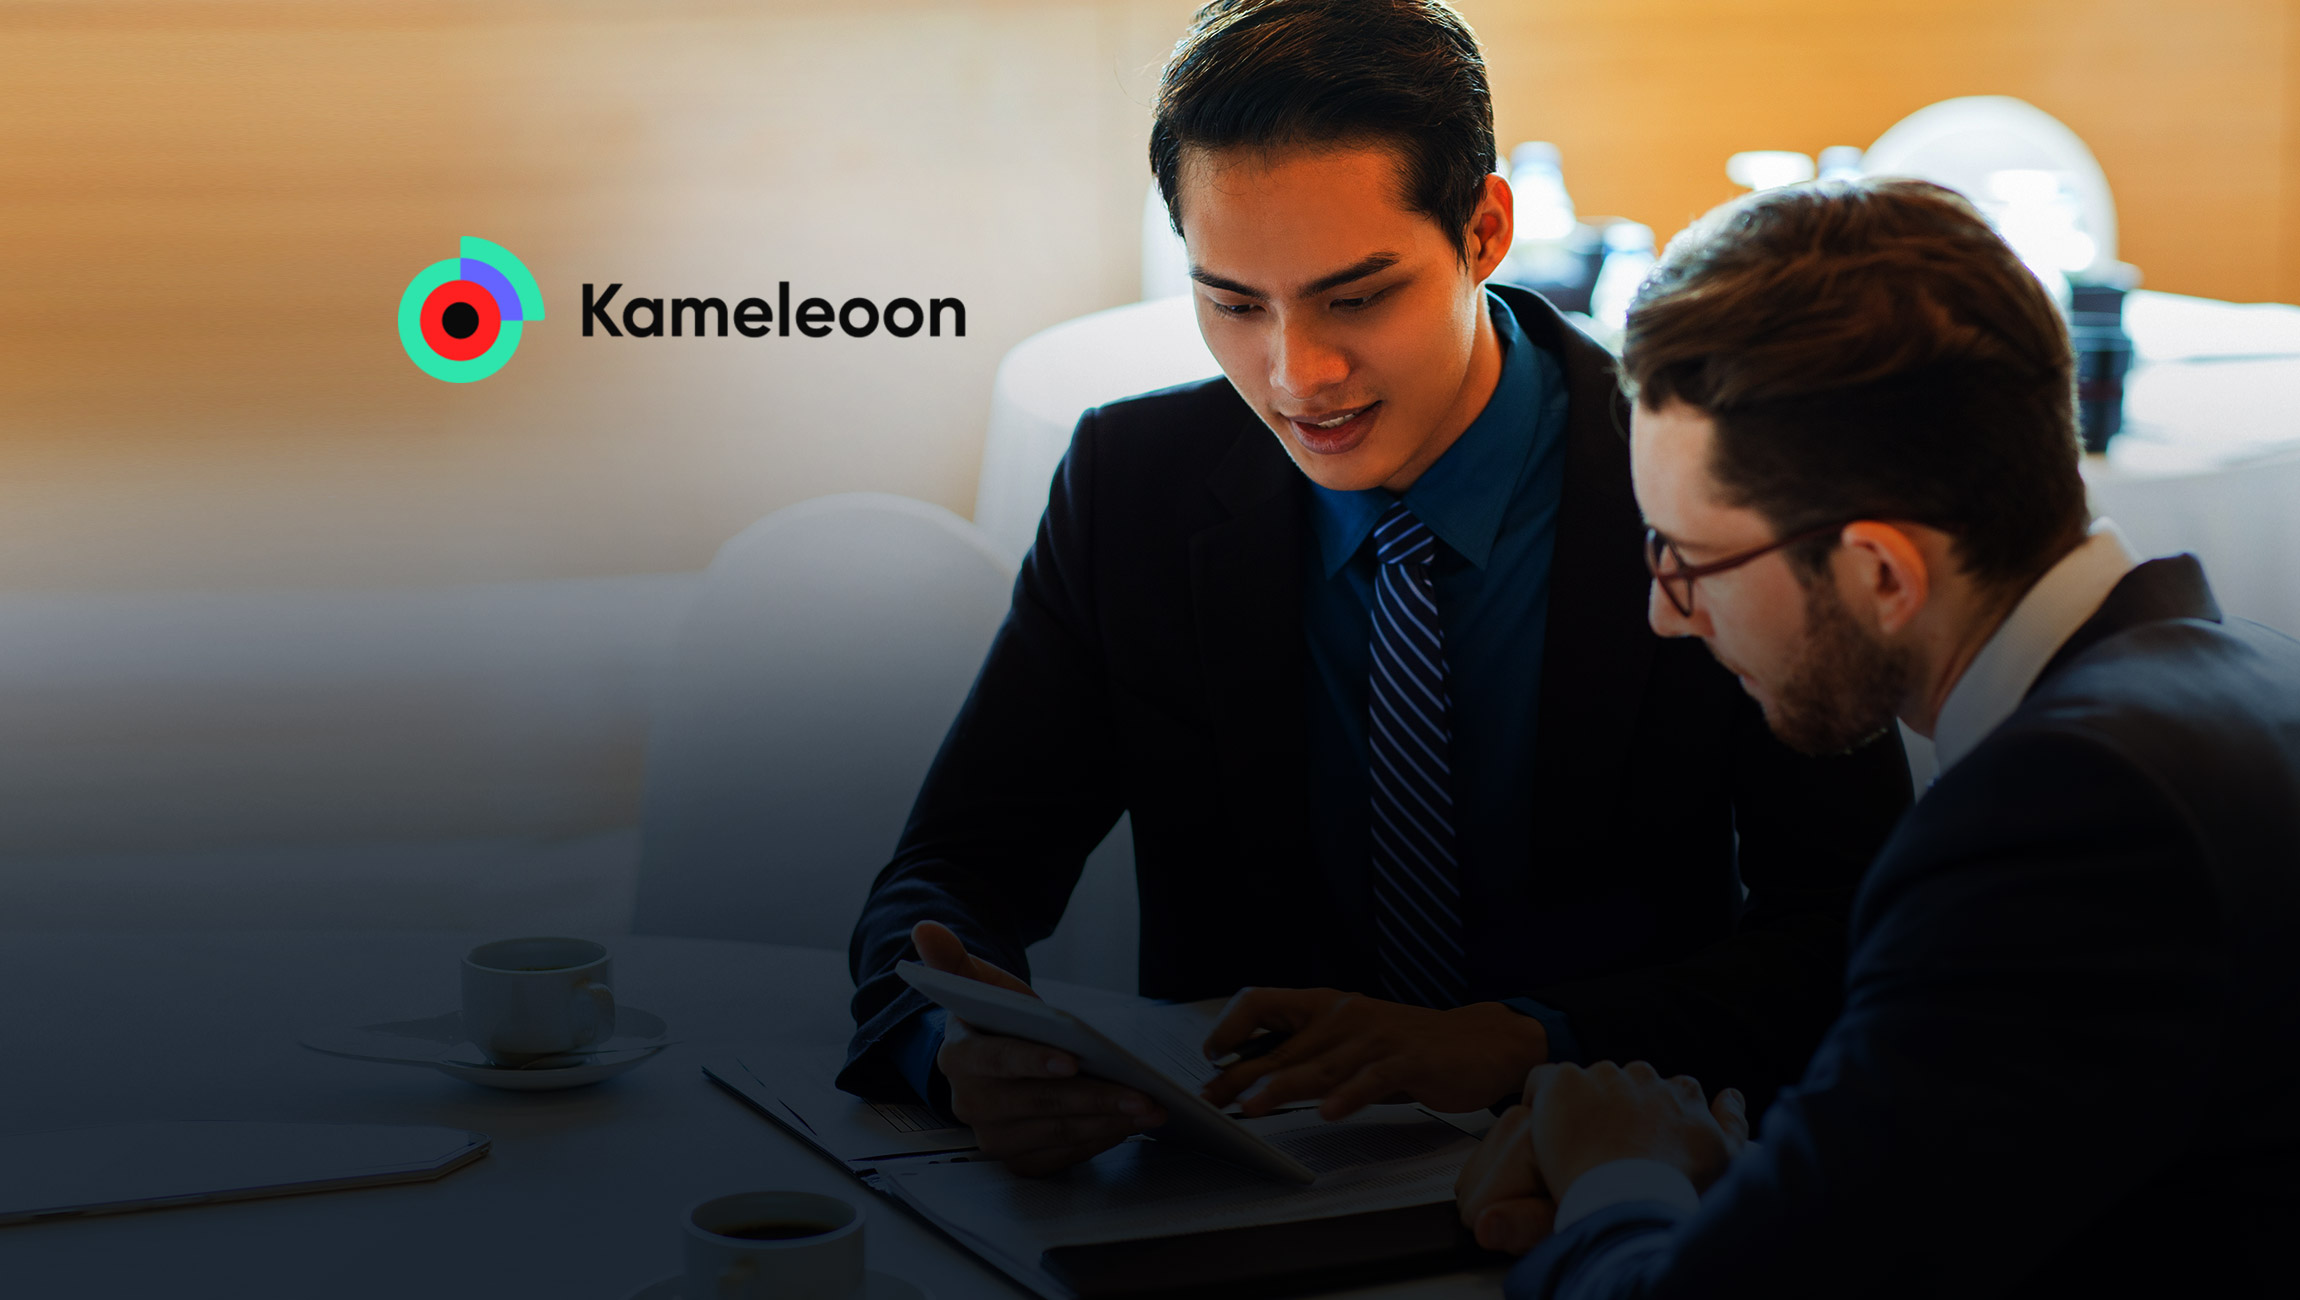 Kameleoon Delivers ROI of 291% and $5.8 Million in Benefits to Enterprise Organizations According to New Total Economic Impact Study